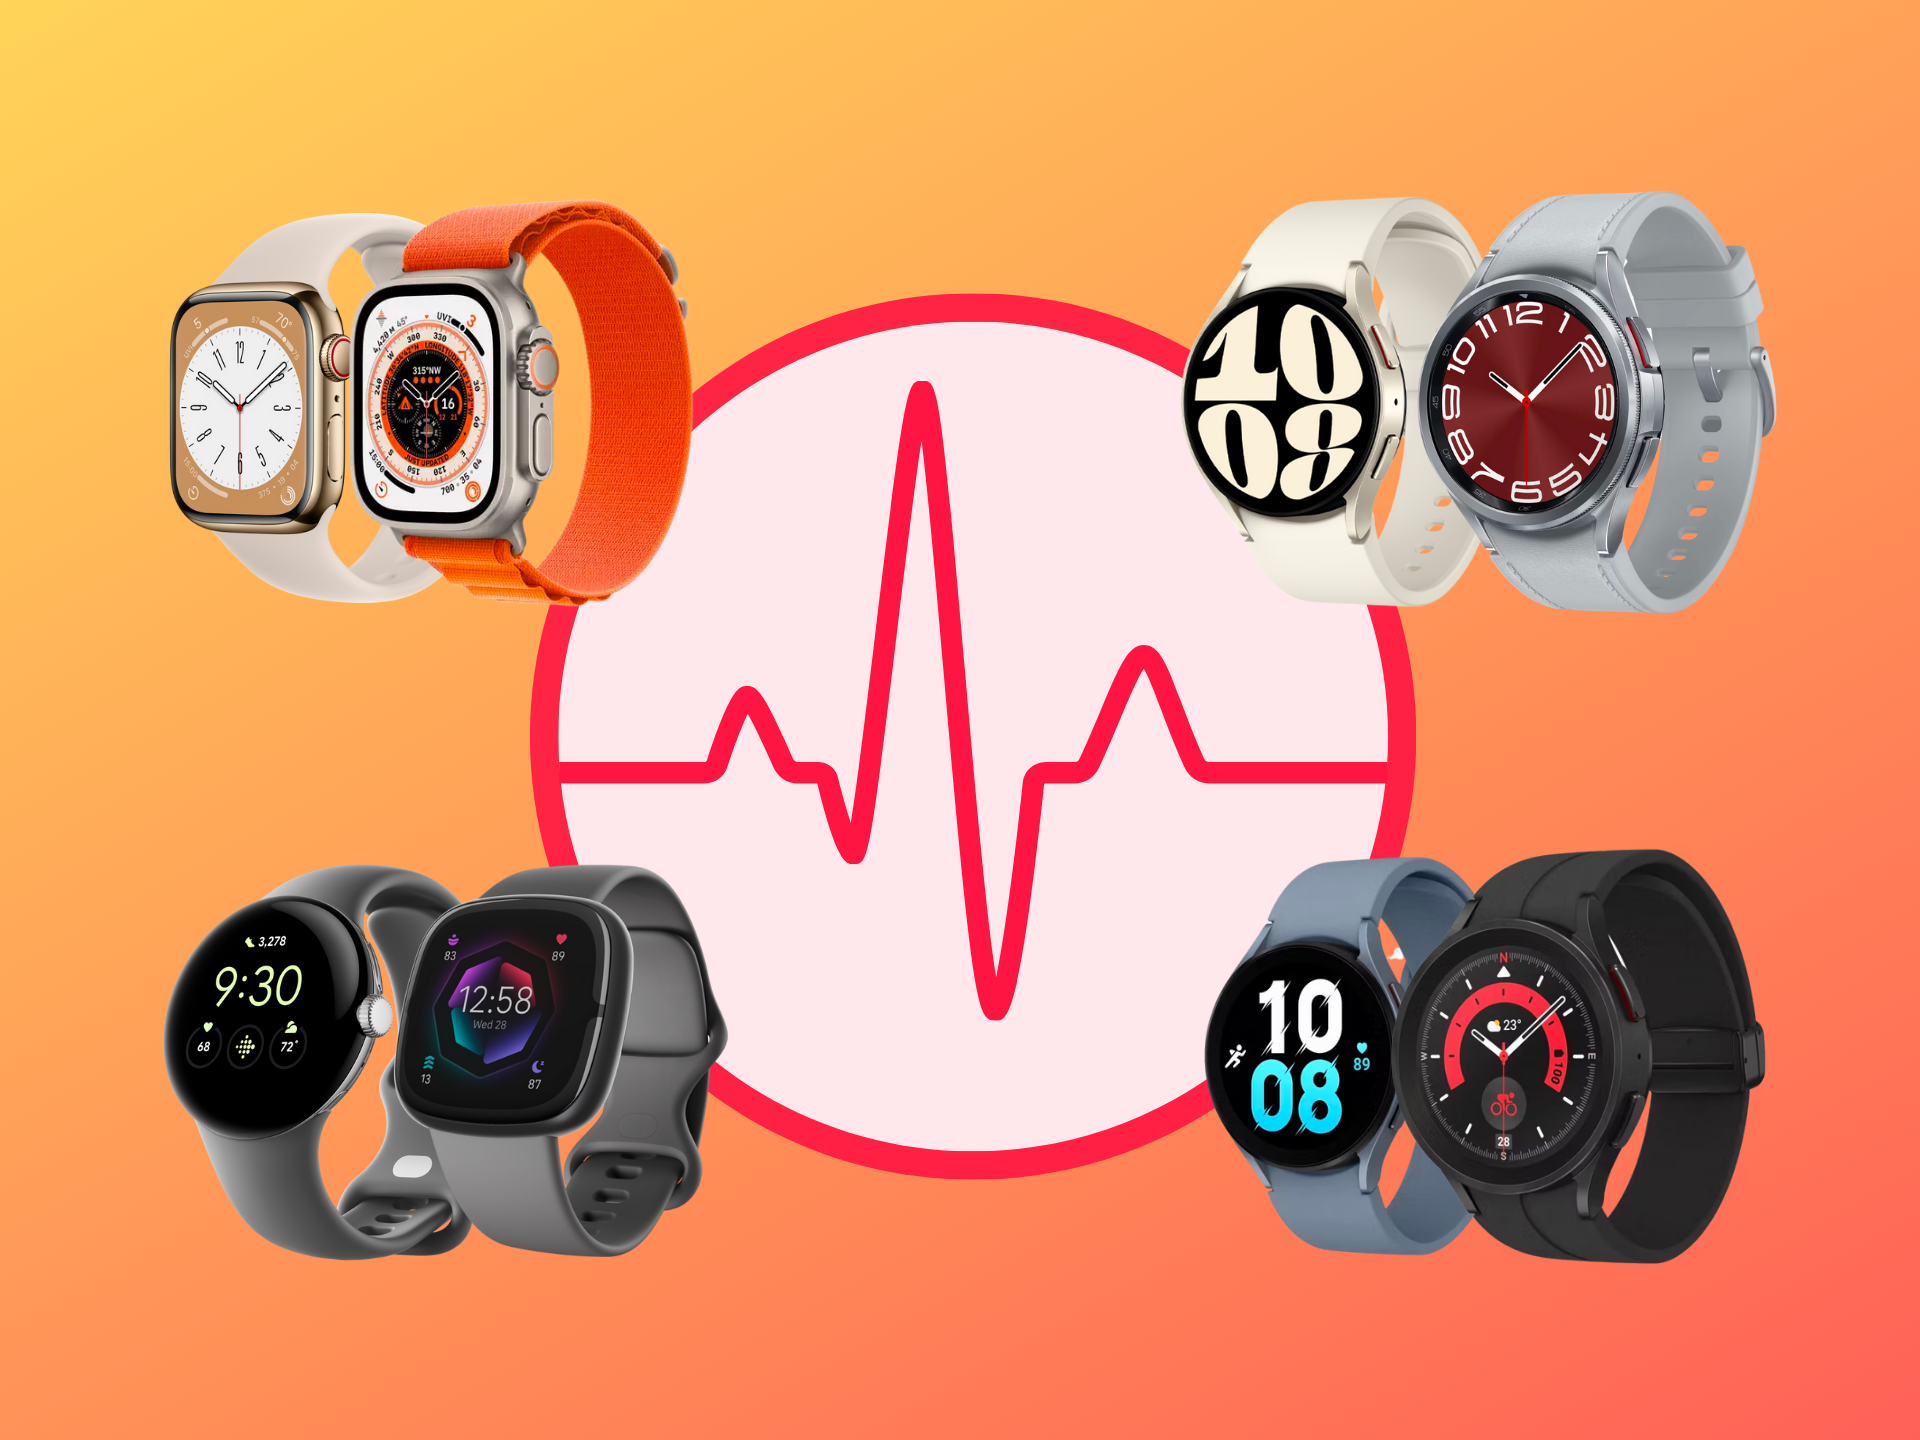 Here are all the smartwatches that can take an ECG